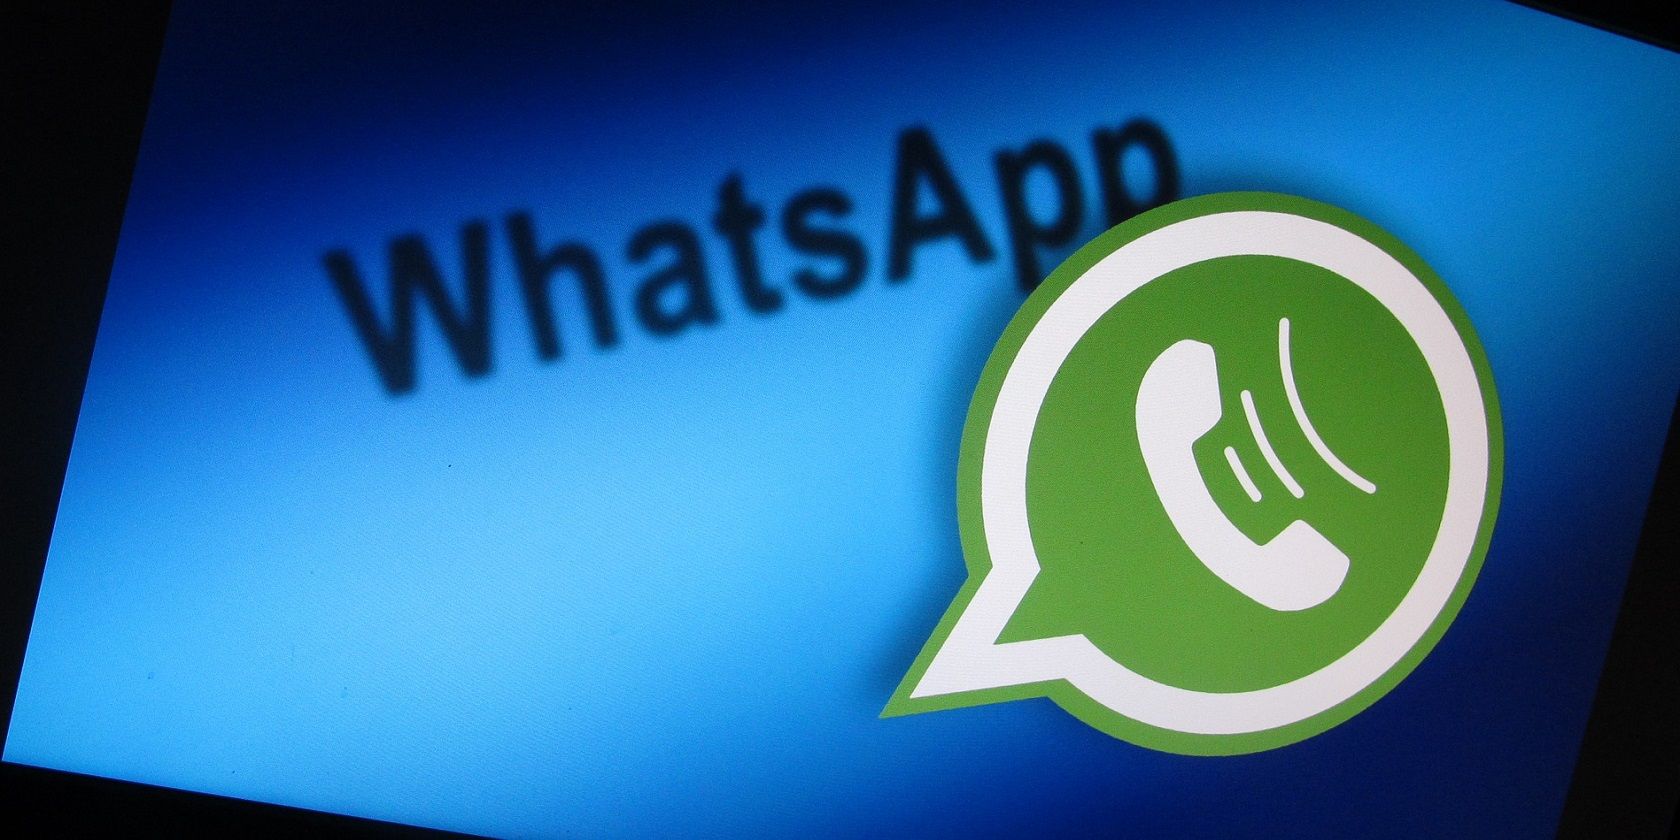 downloading whatsapp data from iphone to pc